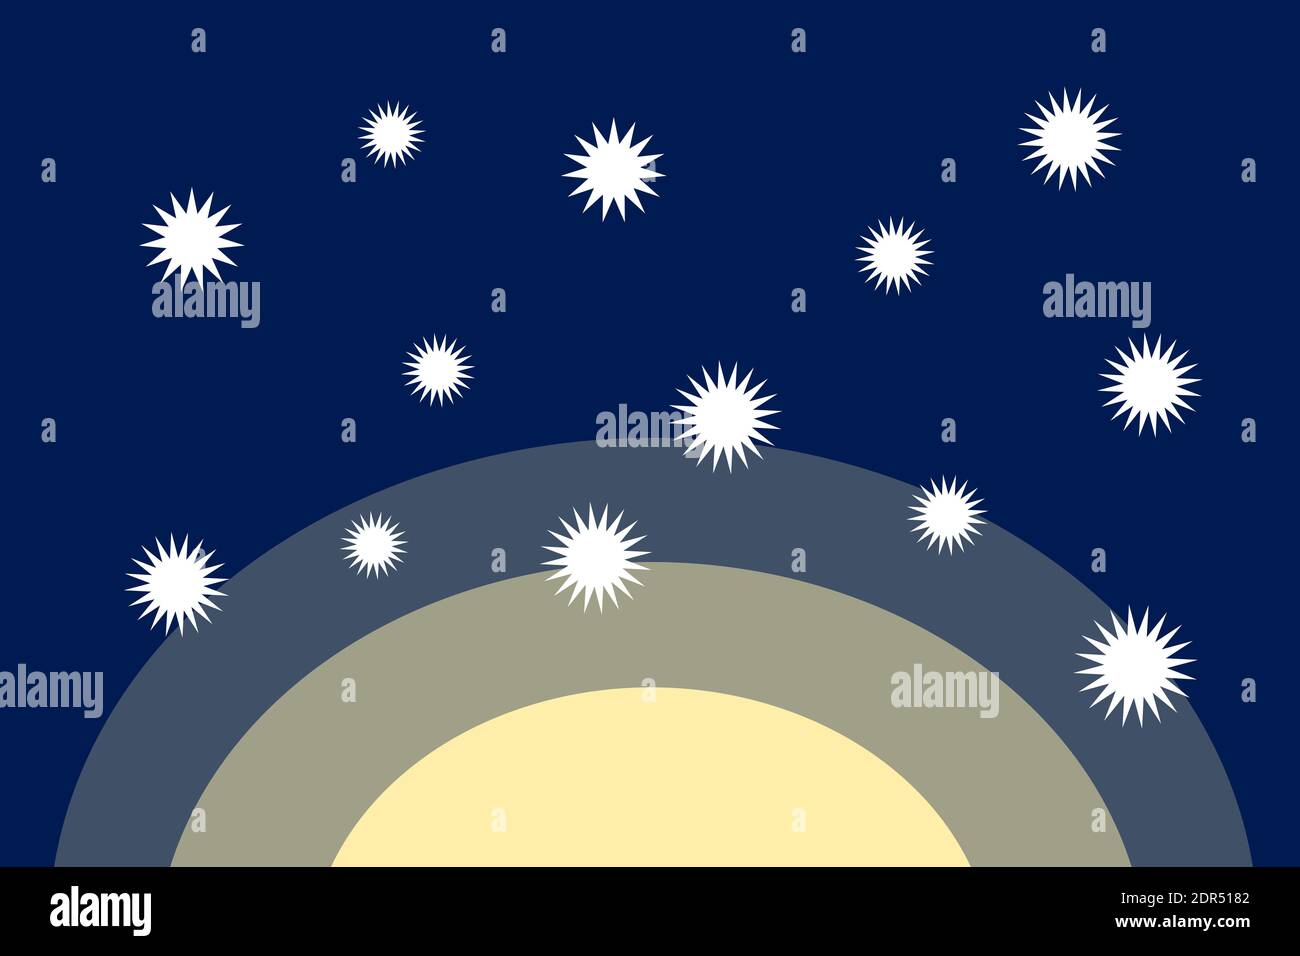 Light pollution - night sky with stars is polluted by artificial yellow light. Vector illustration Stock Photo